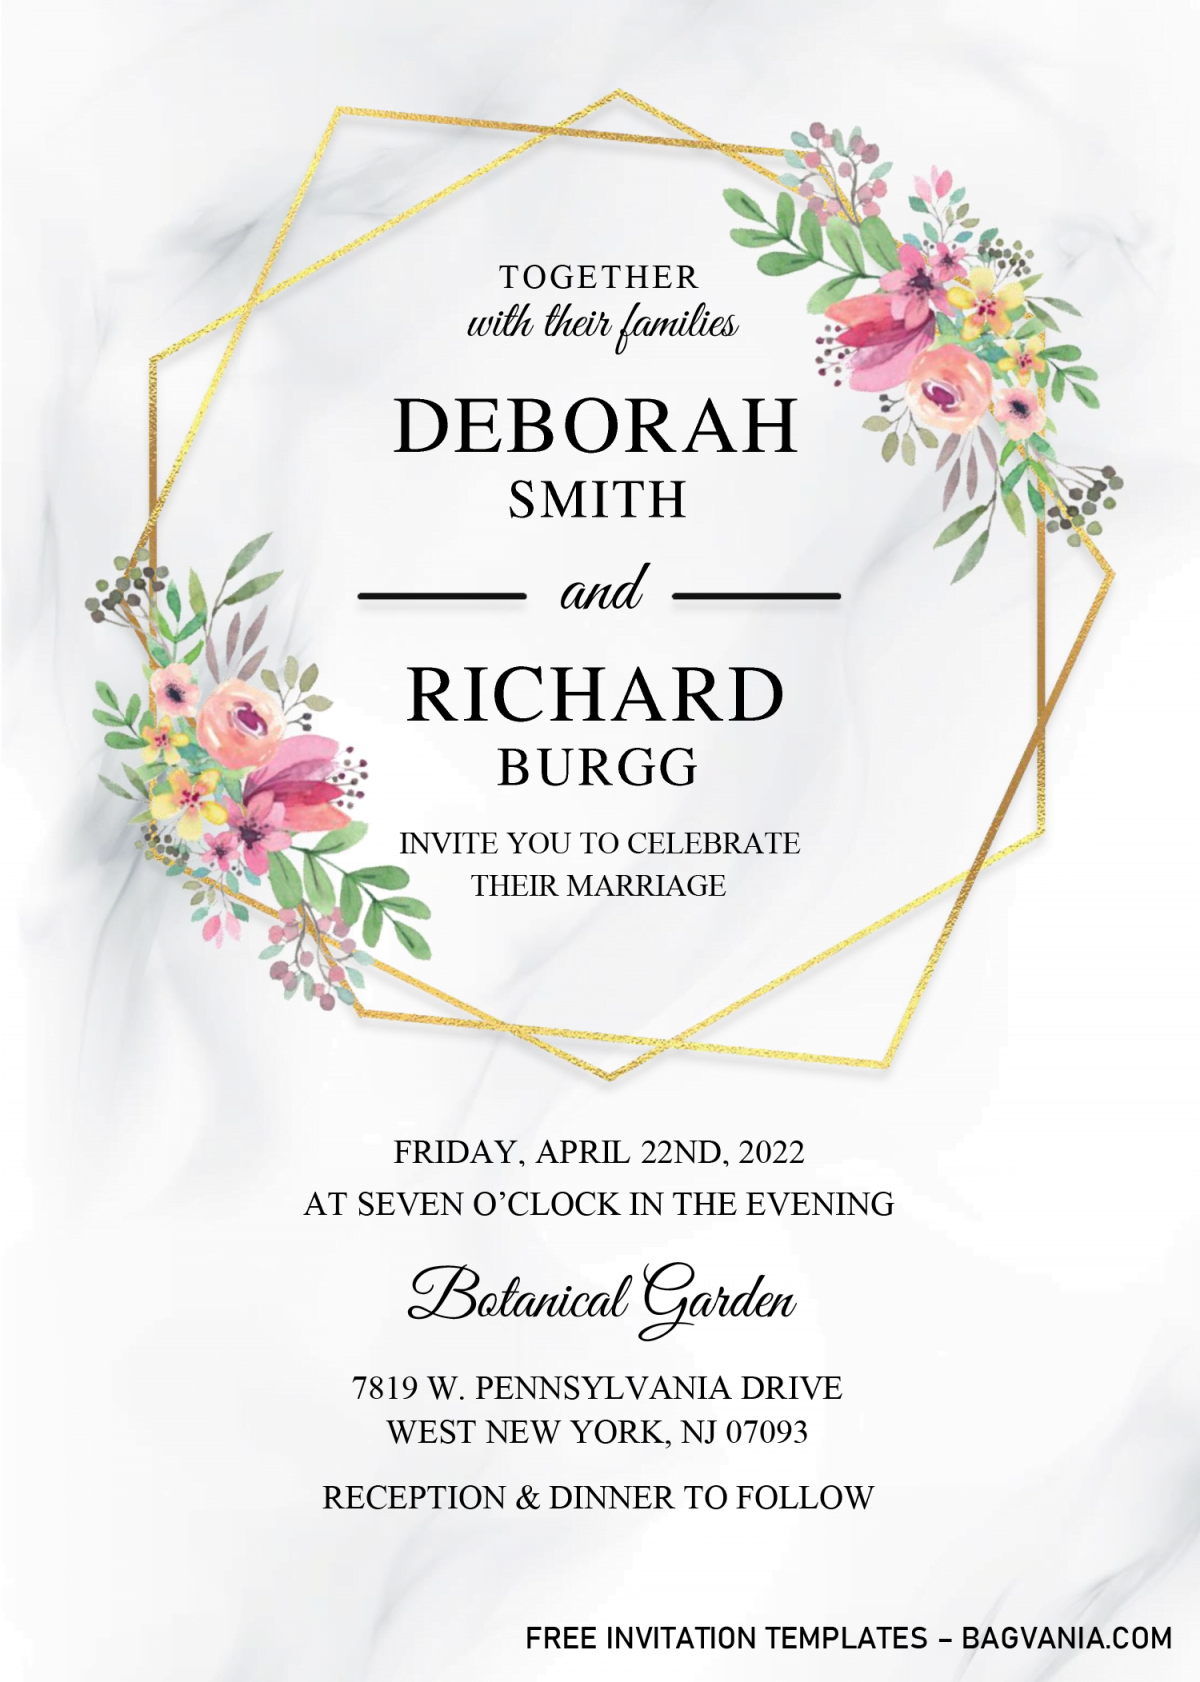 Gold Geometric Floral Invitation Templates - Editable With Microsoft Word and has blush pink floral